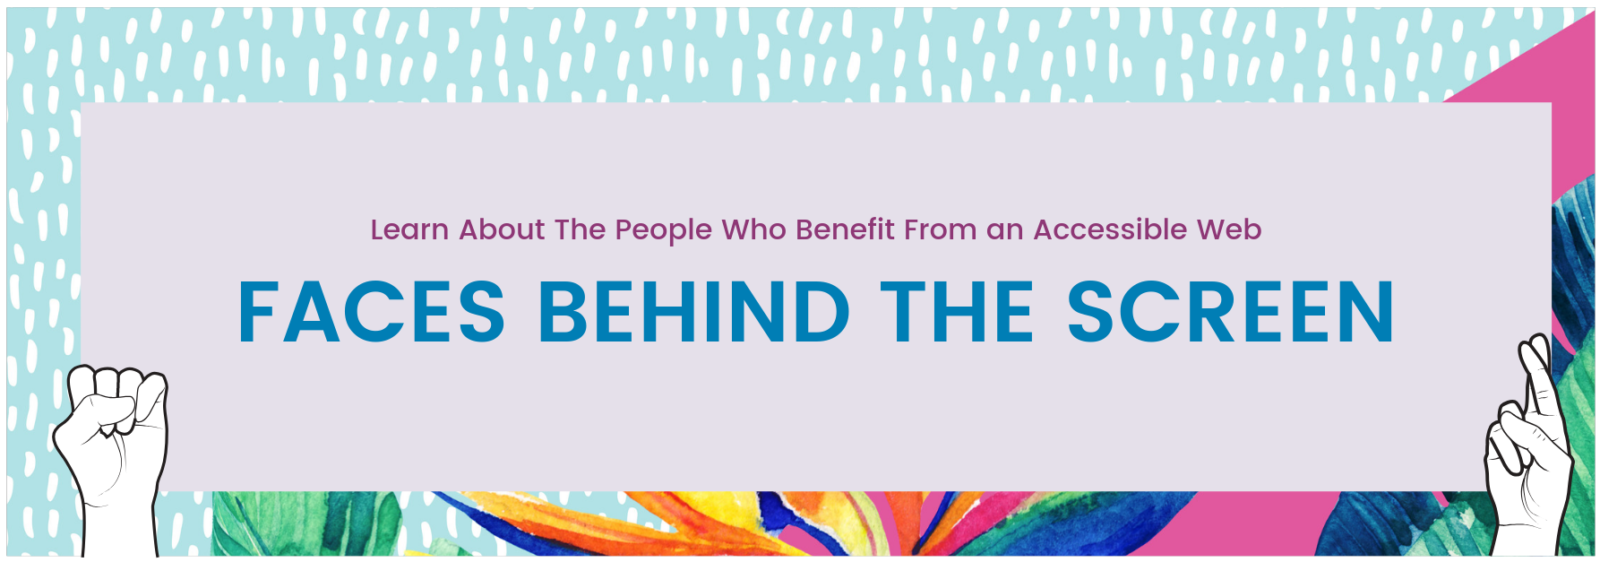 learn about the people who benefit from an accessible web faces behind the screen